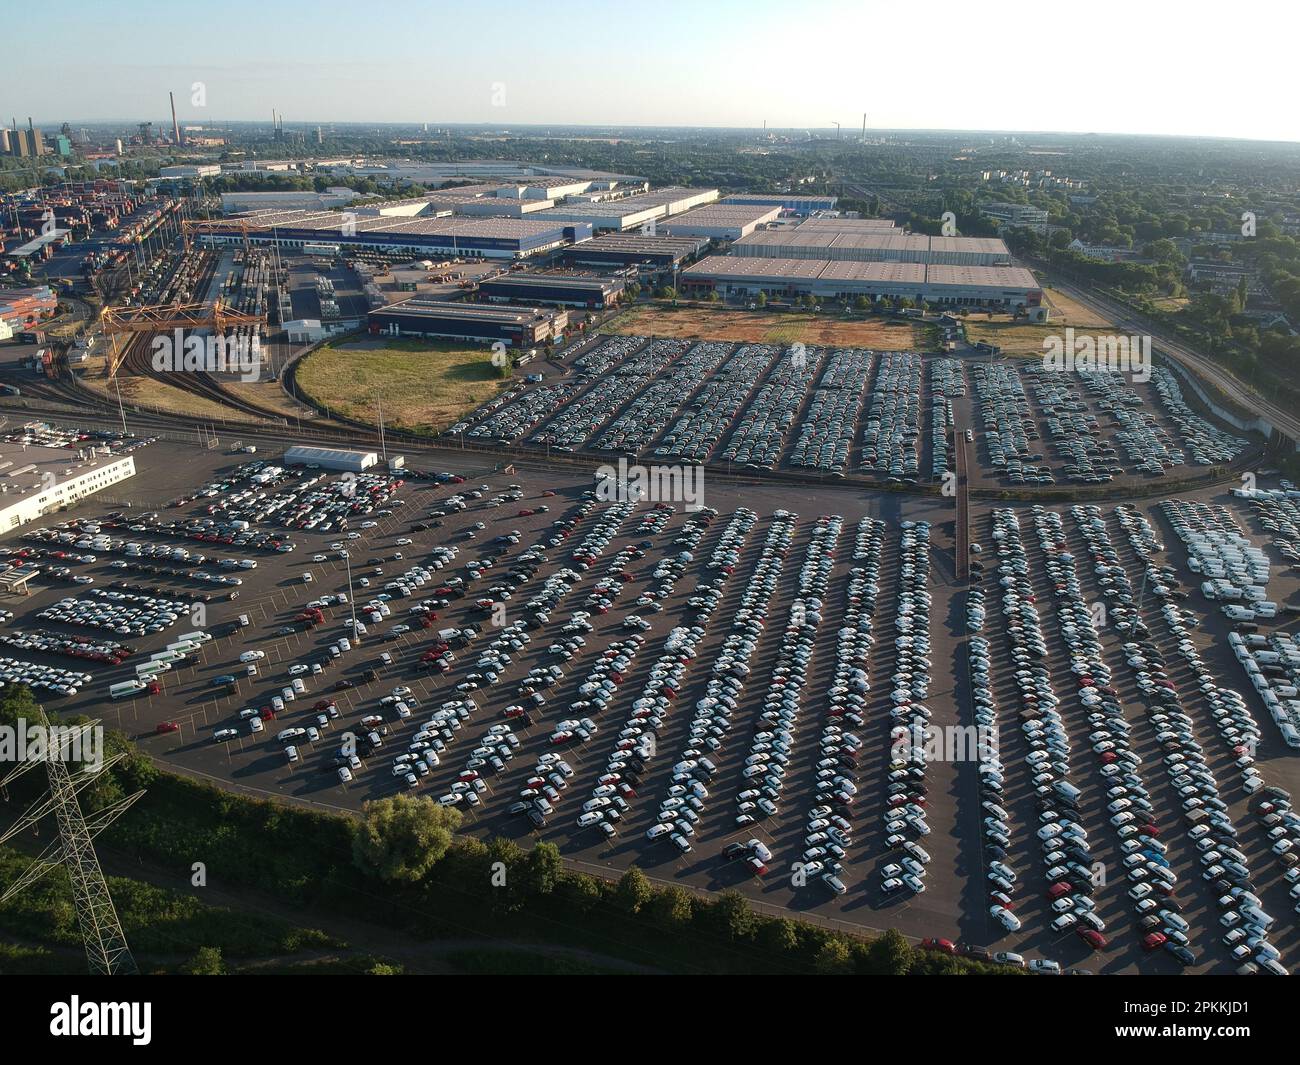 08.07.2018. Duisburg, Germany. Logport I Autoterminal,  part of the DuisPort port area in Duisburg, Germany. Logport I is used to store cars arriving Stock Photo